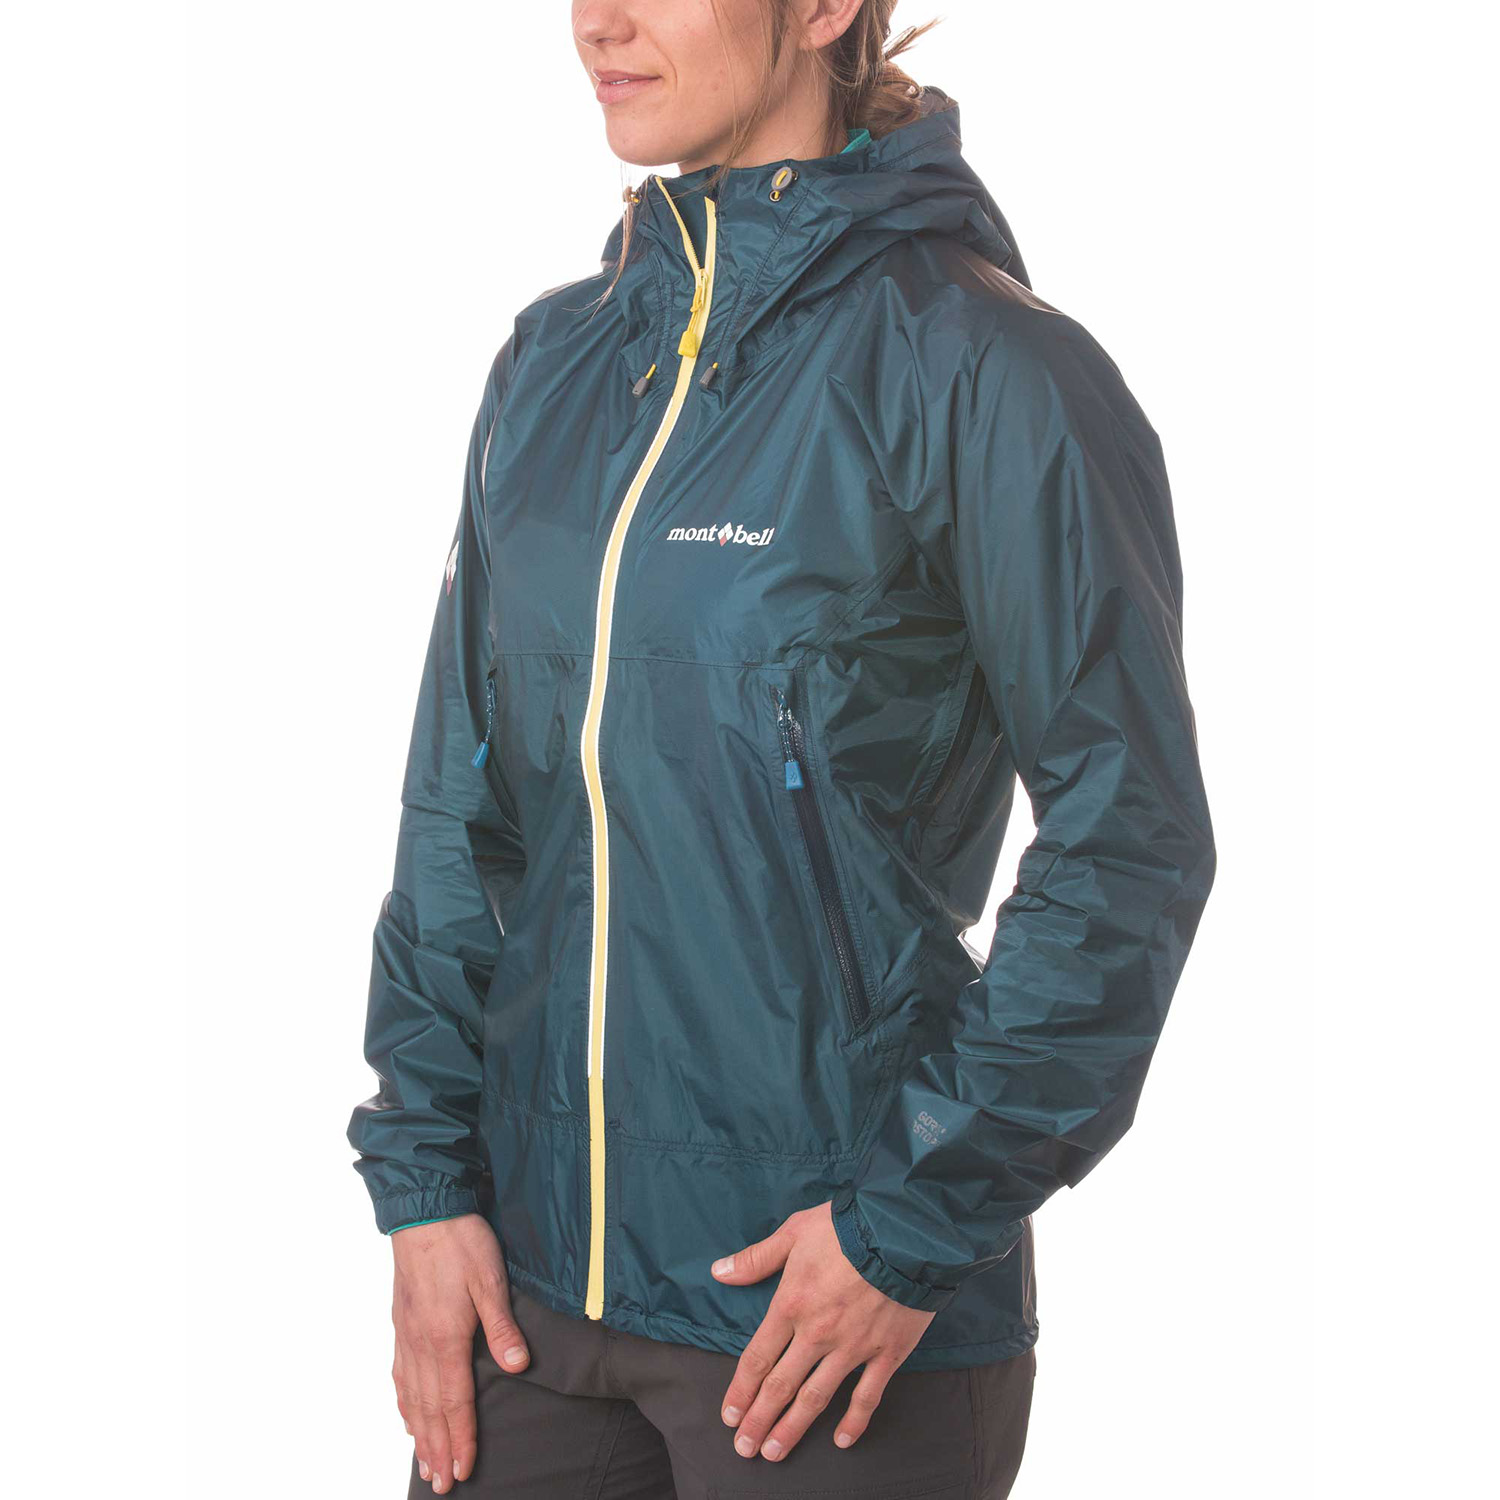 Unlock Wilderness' choice in the Montbell Vs North Face comparison, the Versalite Jacket by Montbell